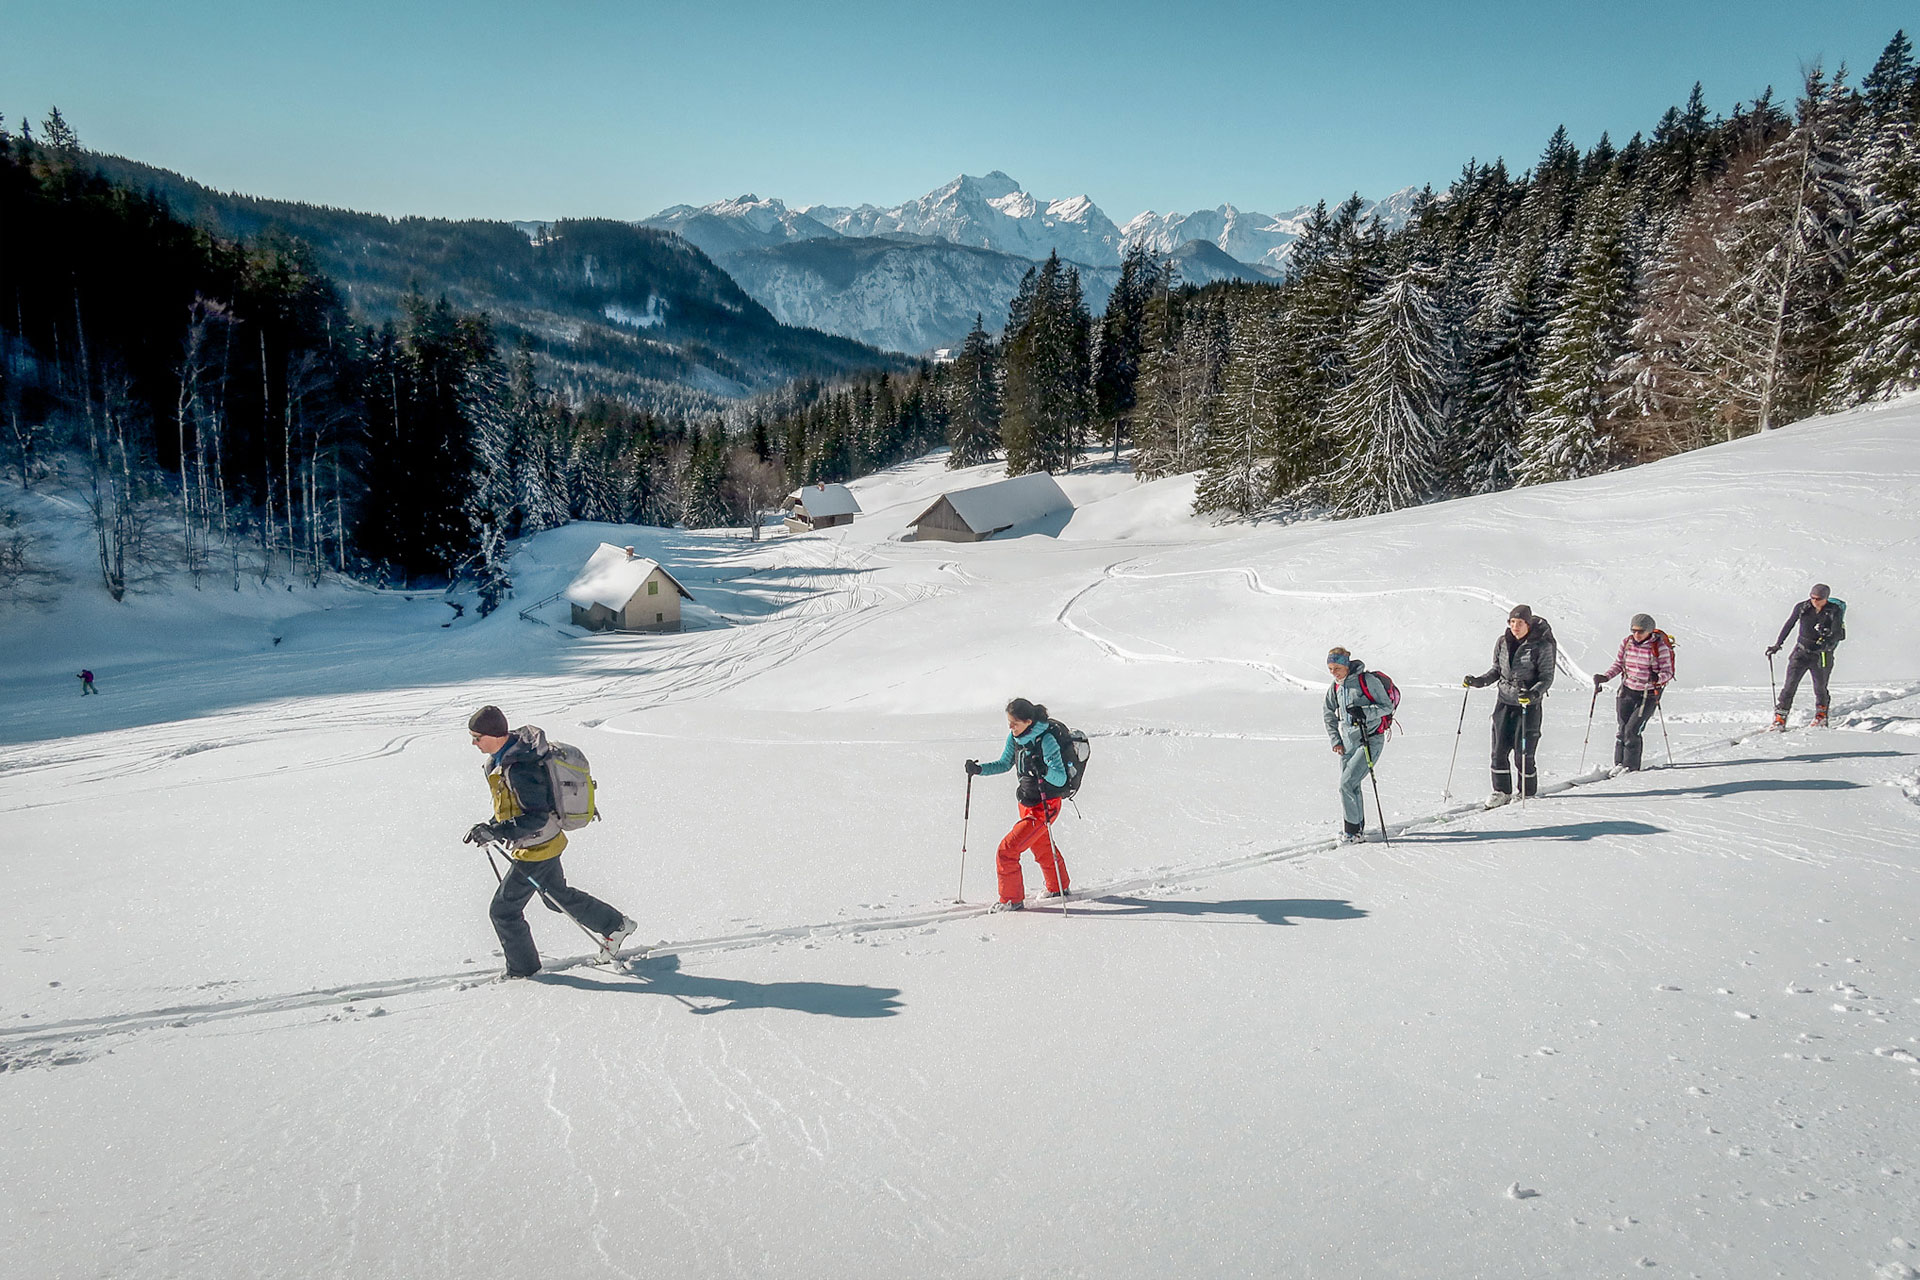 One day ski touring workshop includes basics of movement with ski touring equipment.